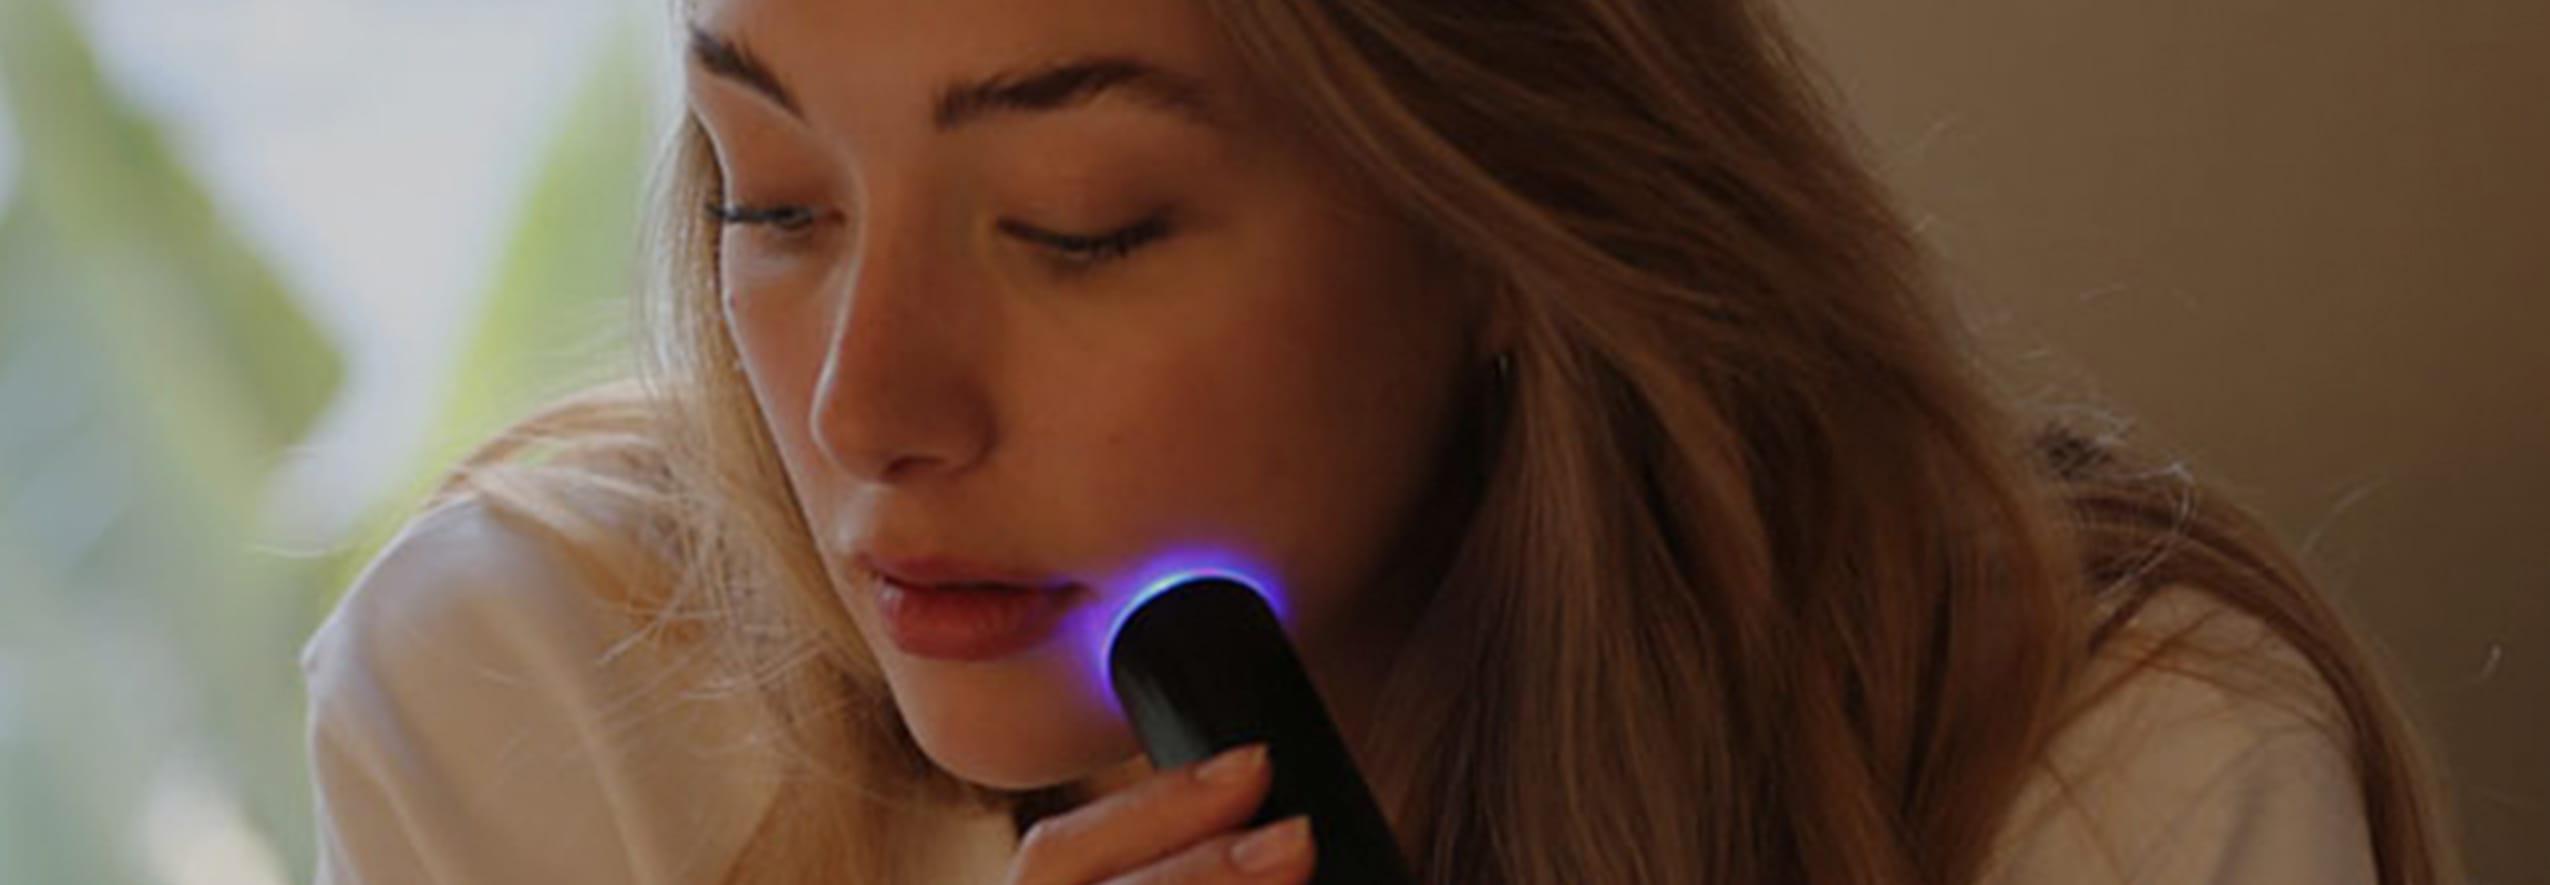 LYMA Laser being used on chin